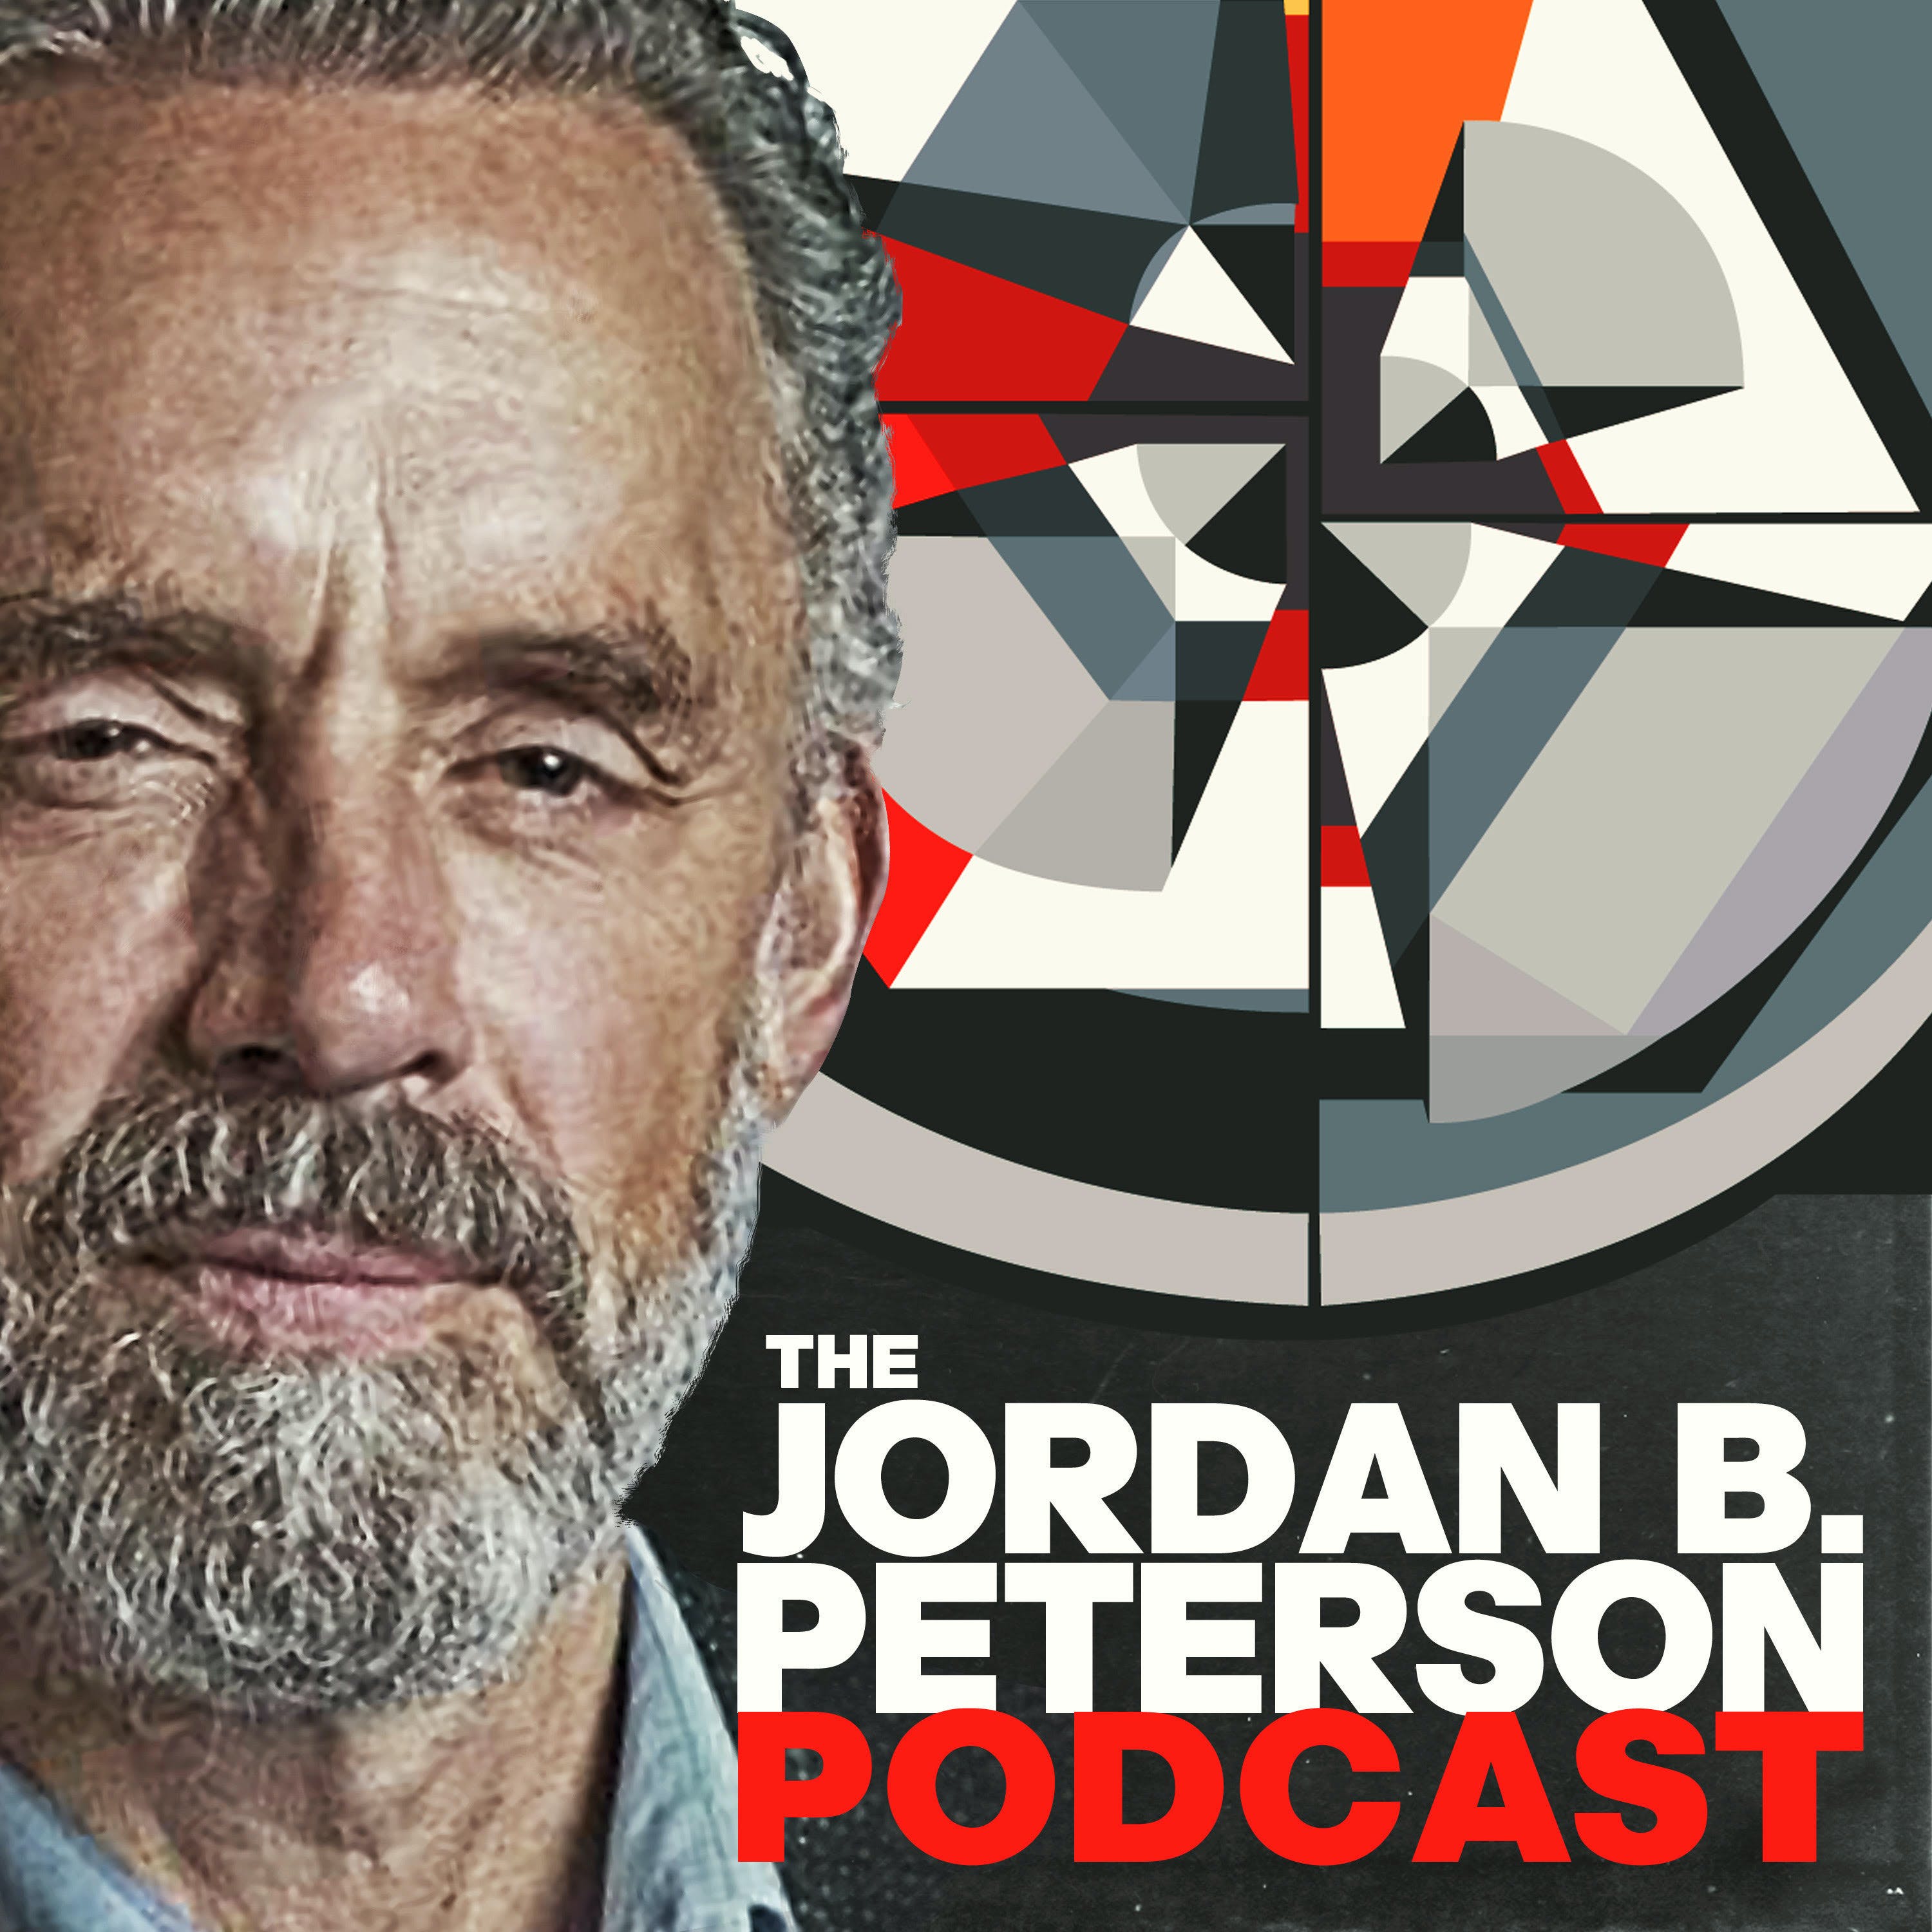 Jordan Peterson Thinks Thoughts Have Two Elements: Revelatory & Dialogical